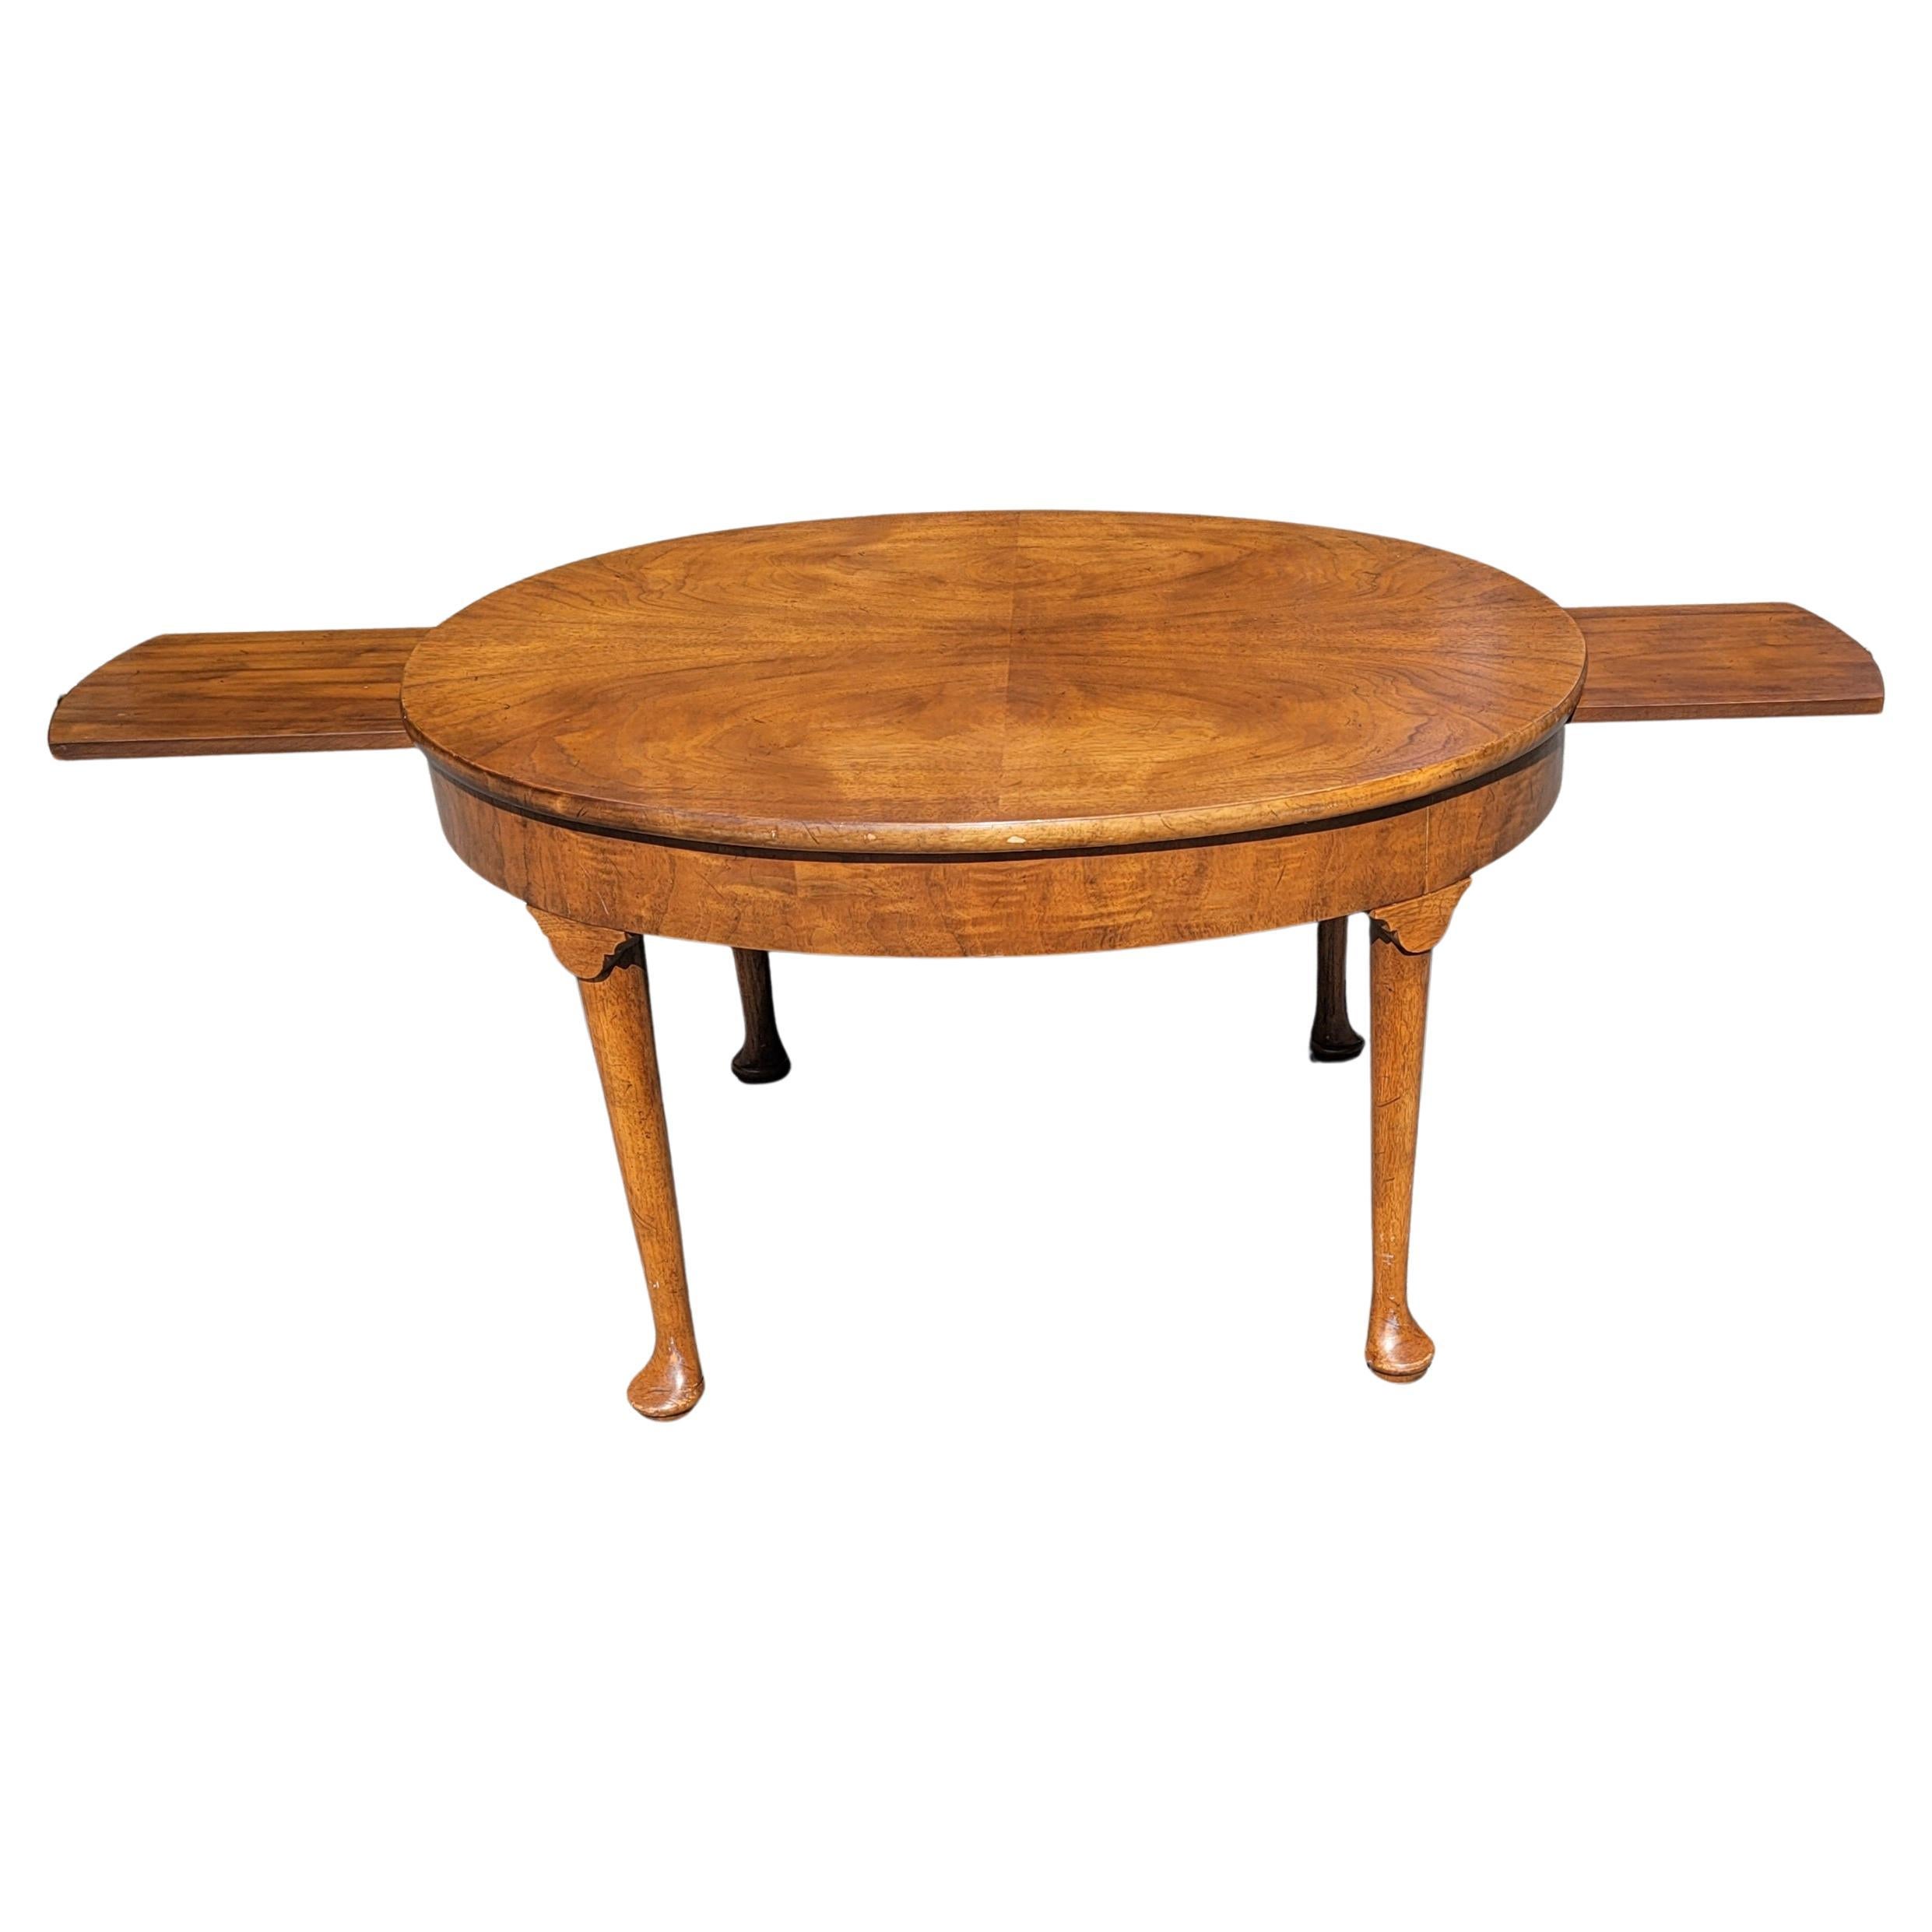 1970s Vintage Queen Anne Walnut Oval Extension Coffee Table with Pull-Out Trays